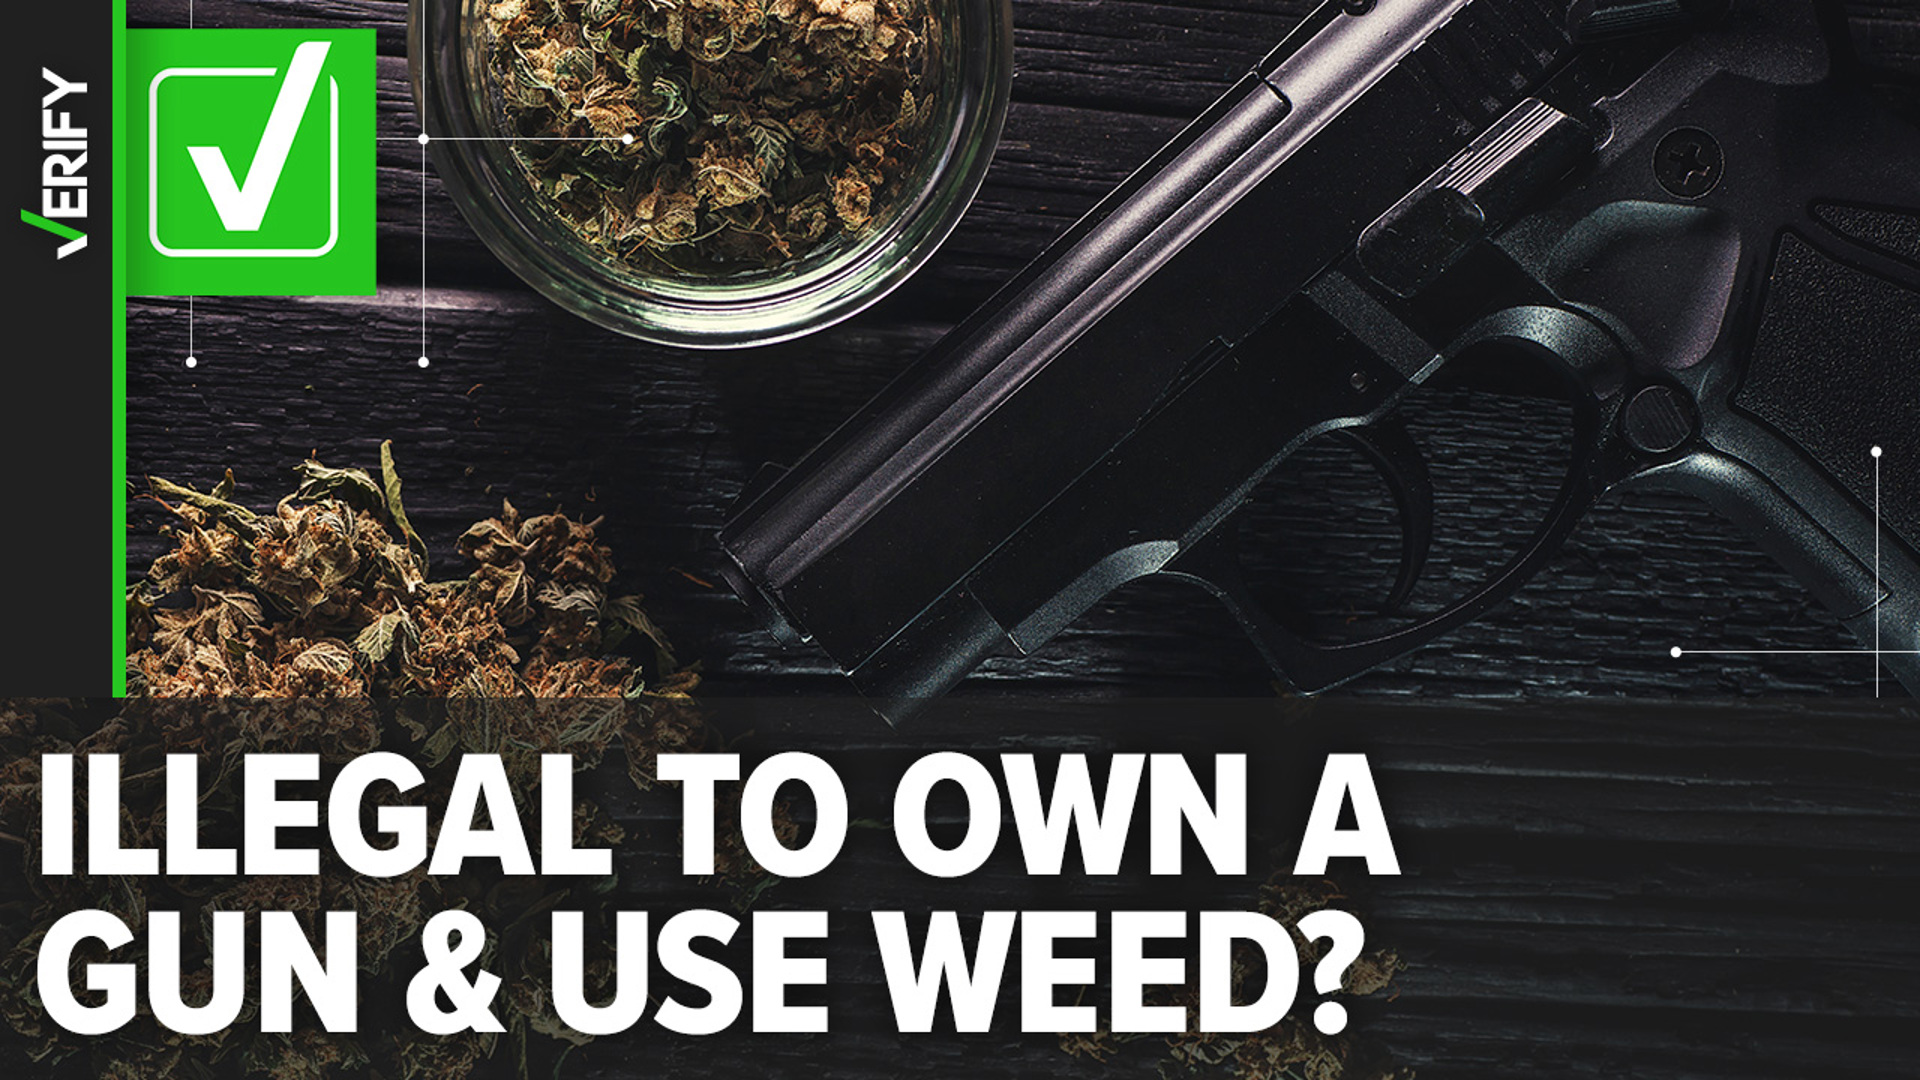 After Hunter Biden was convicted of three felony gun charges, posts on X claimed it is against federal law to own a gun with a medical marijuana card. That’s true.